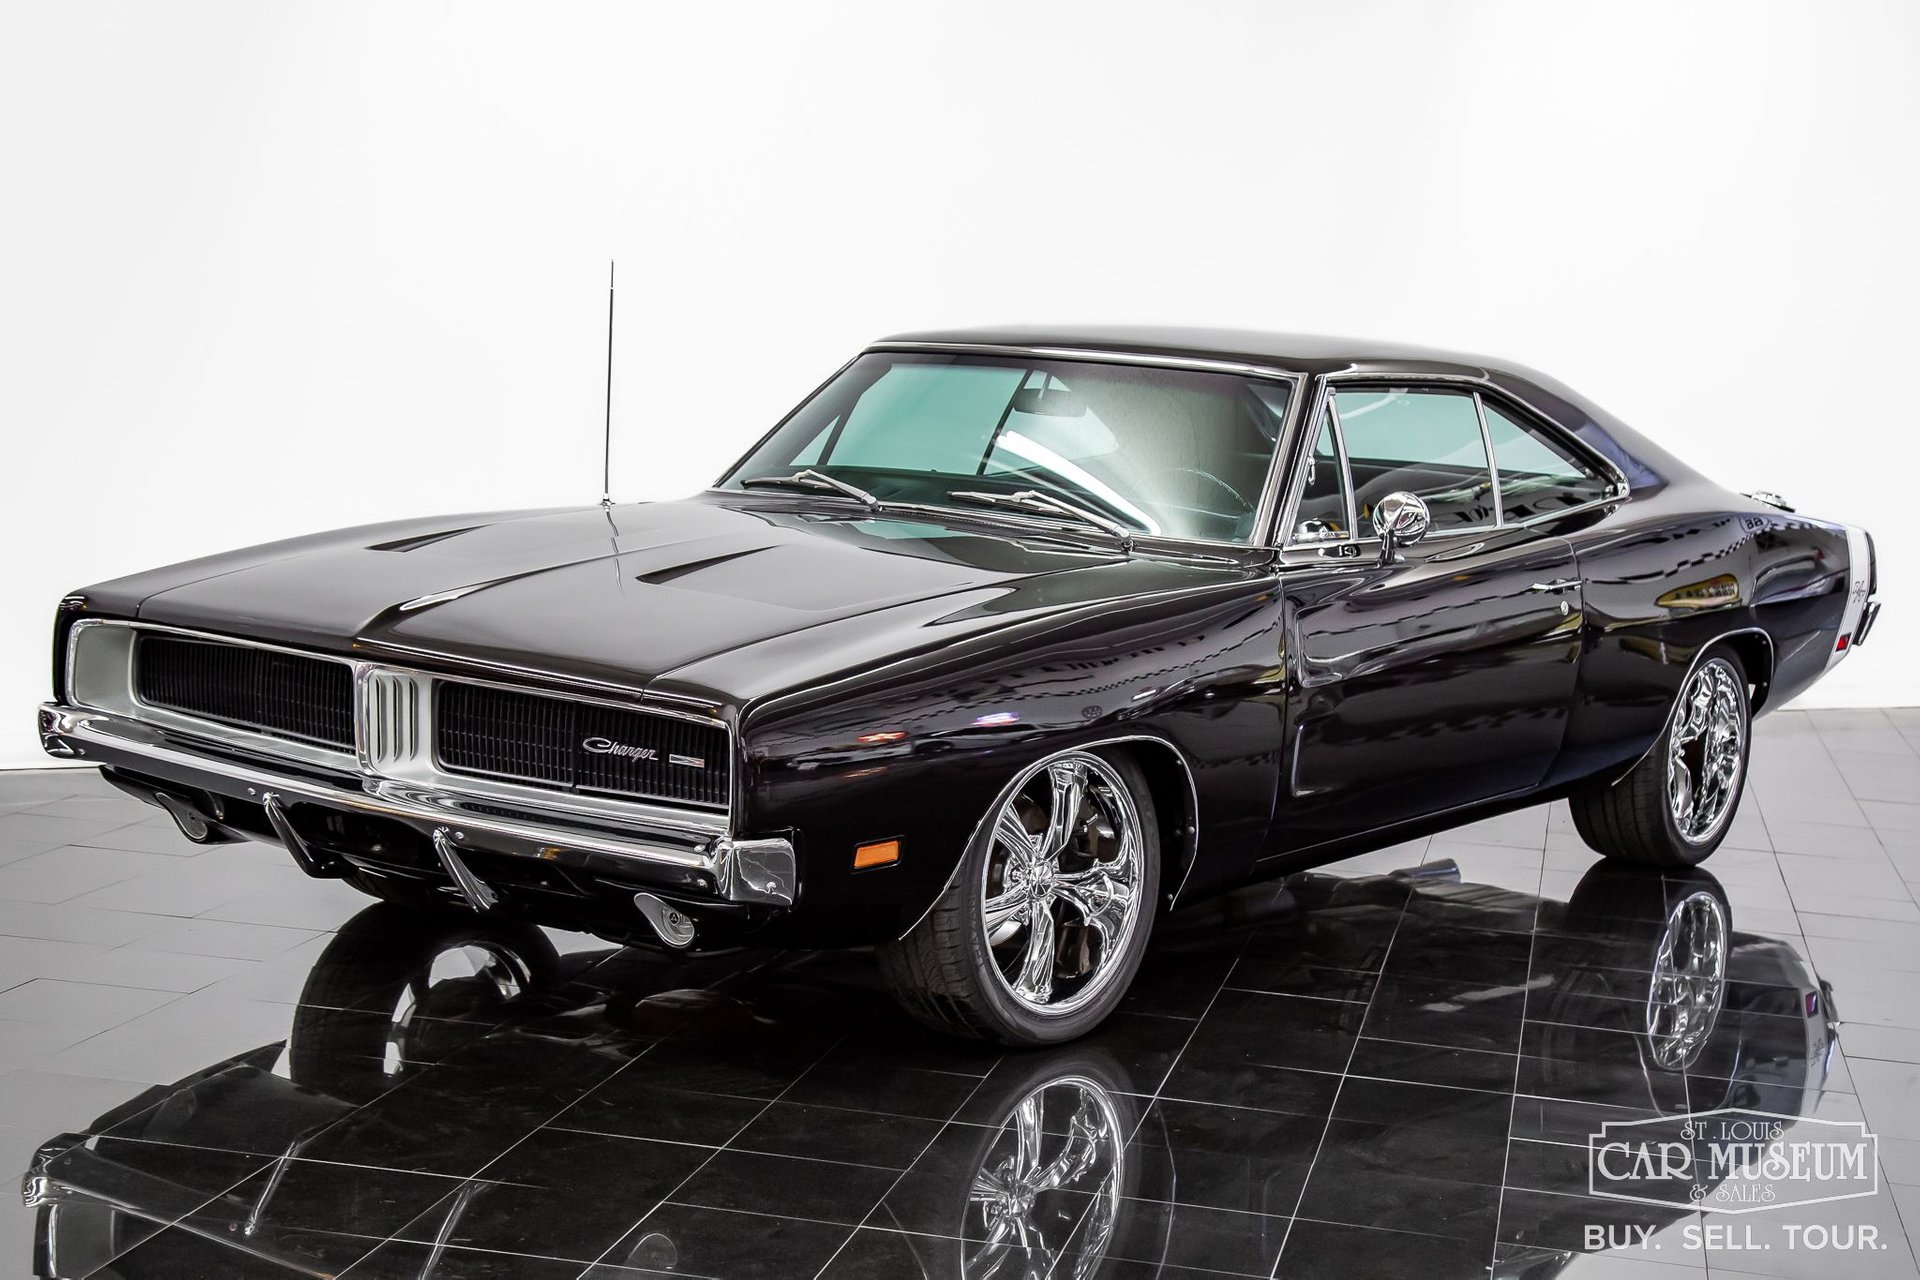 1969 Dodge Charger For Sale | St. Louis Car Museum